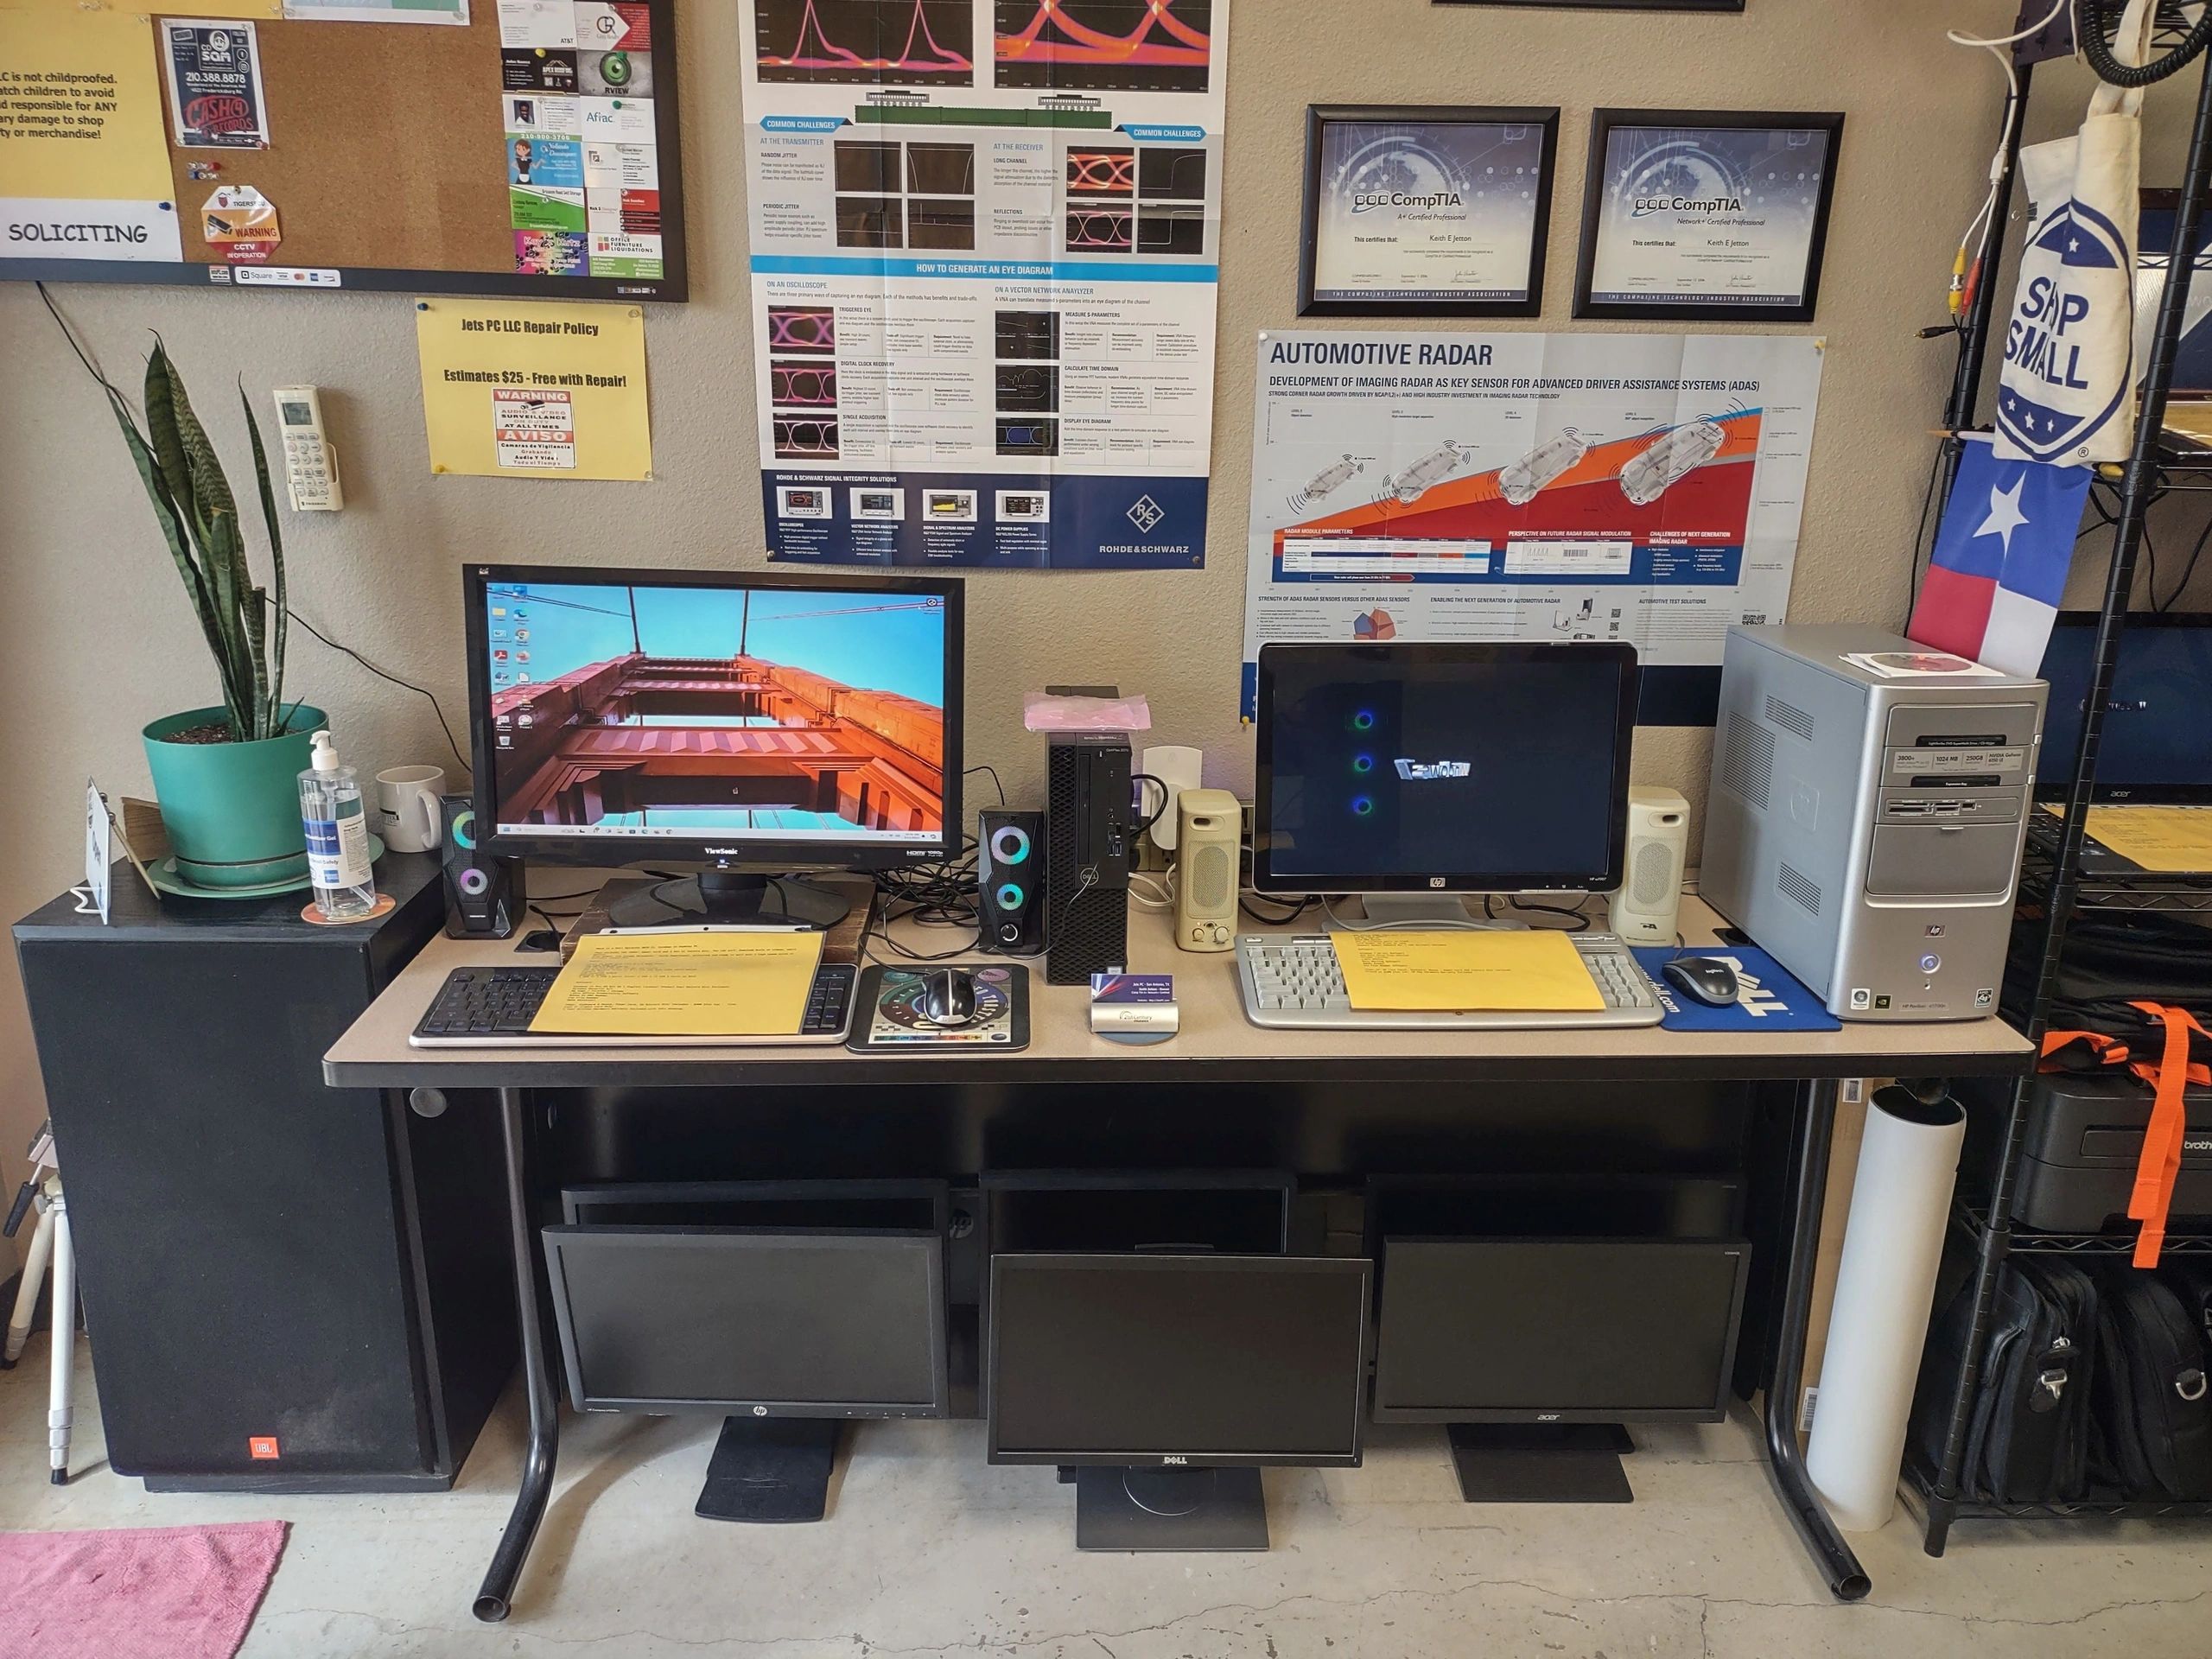 More Desktops for sale at our retail shop in San Antonio Texas